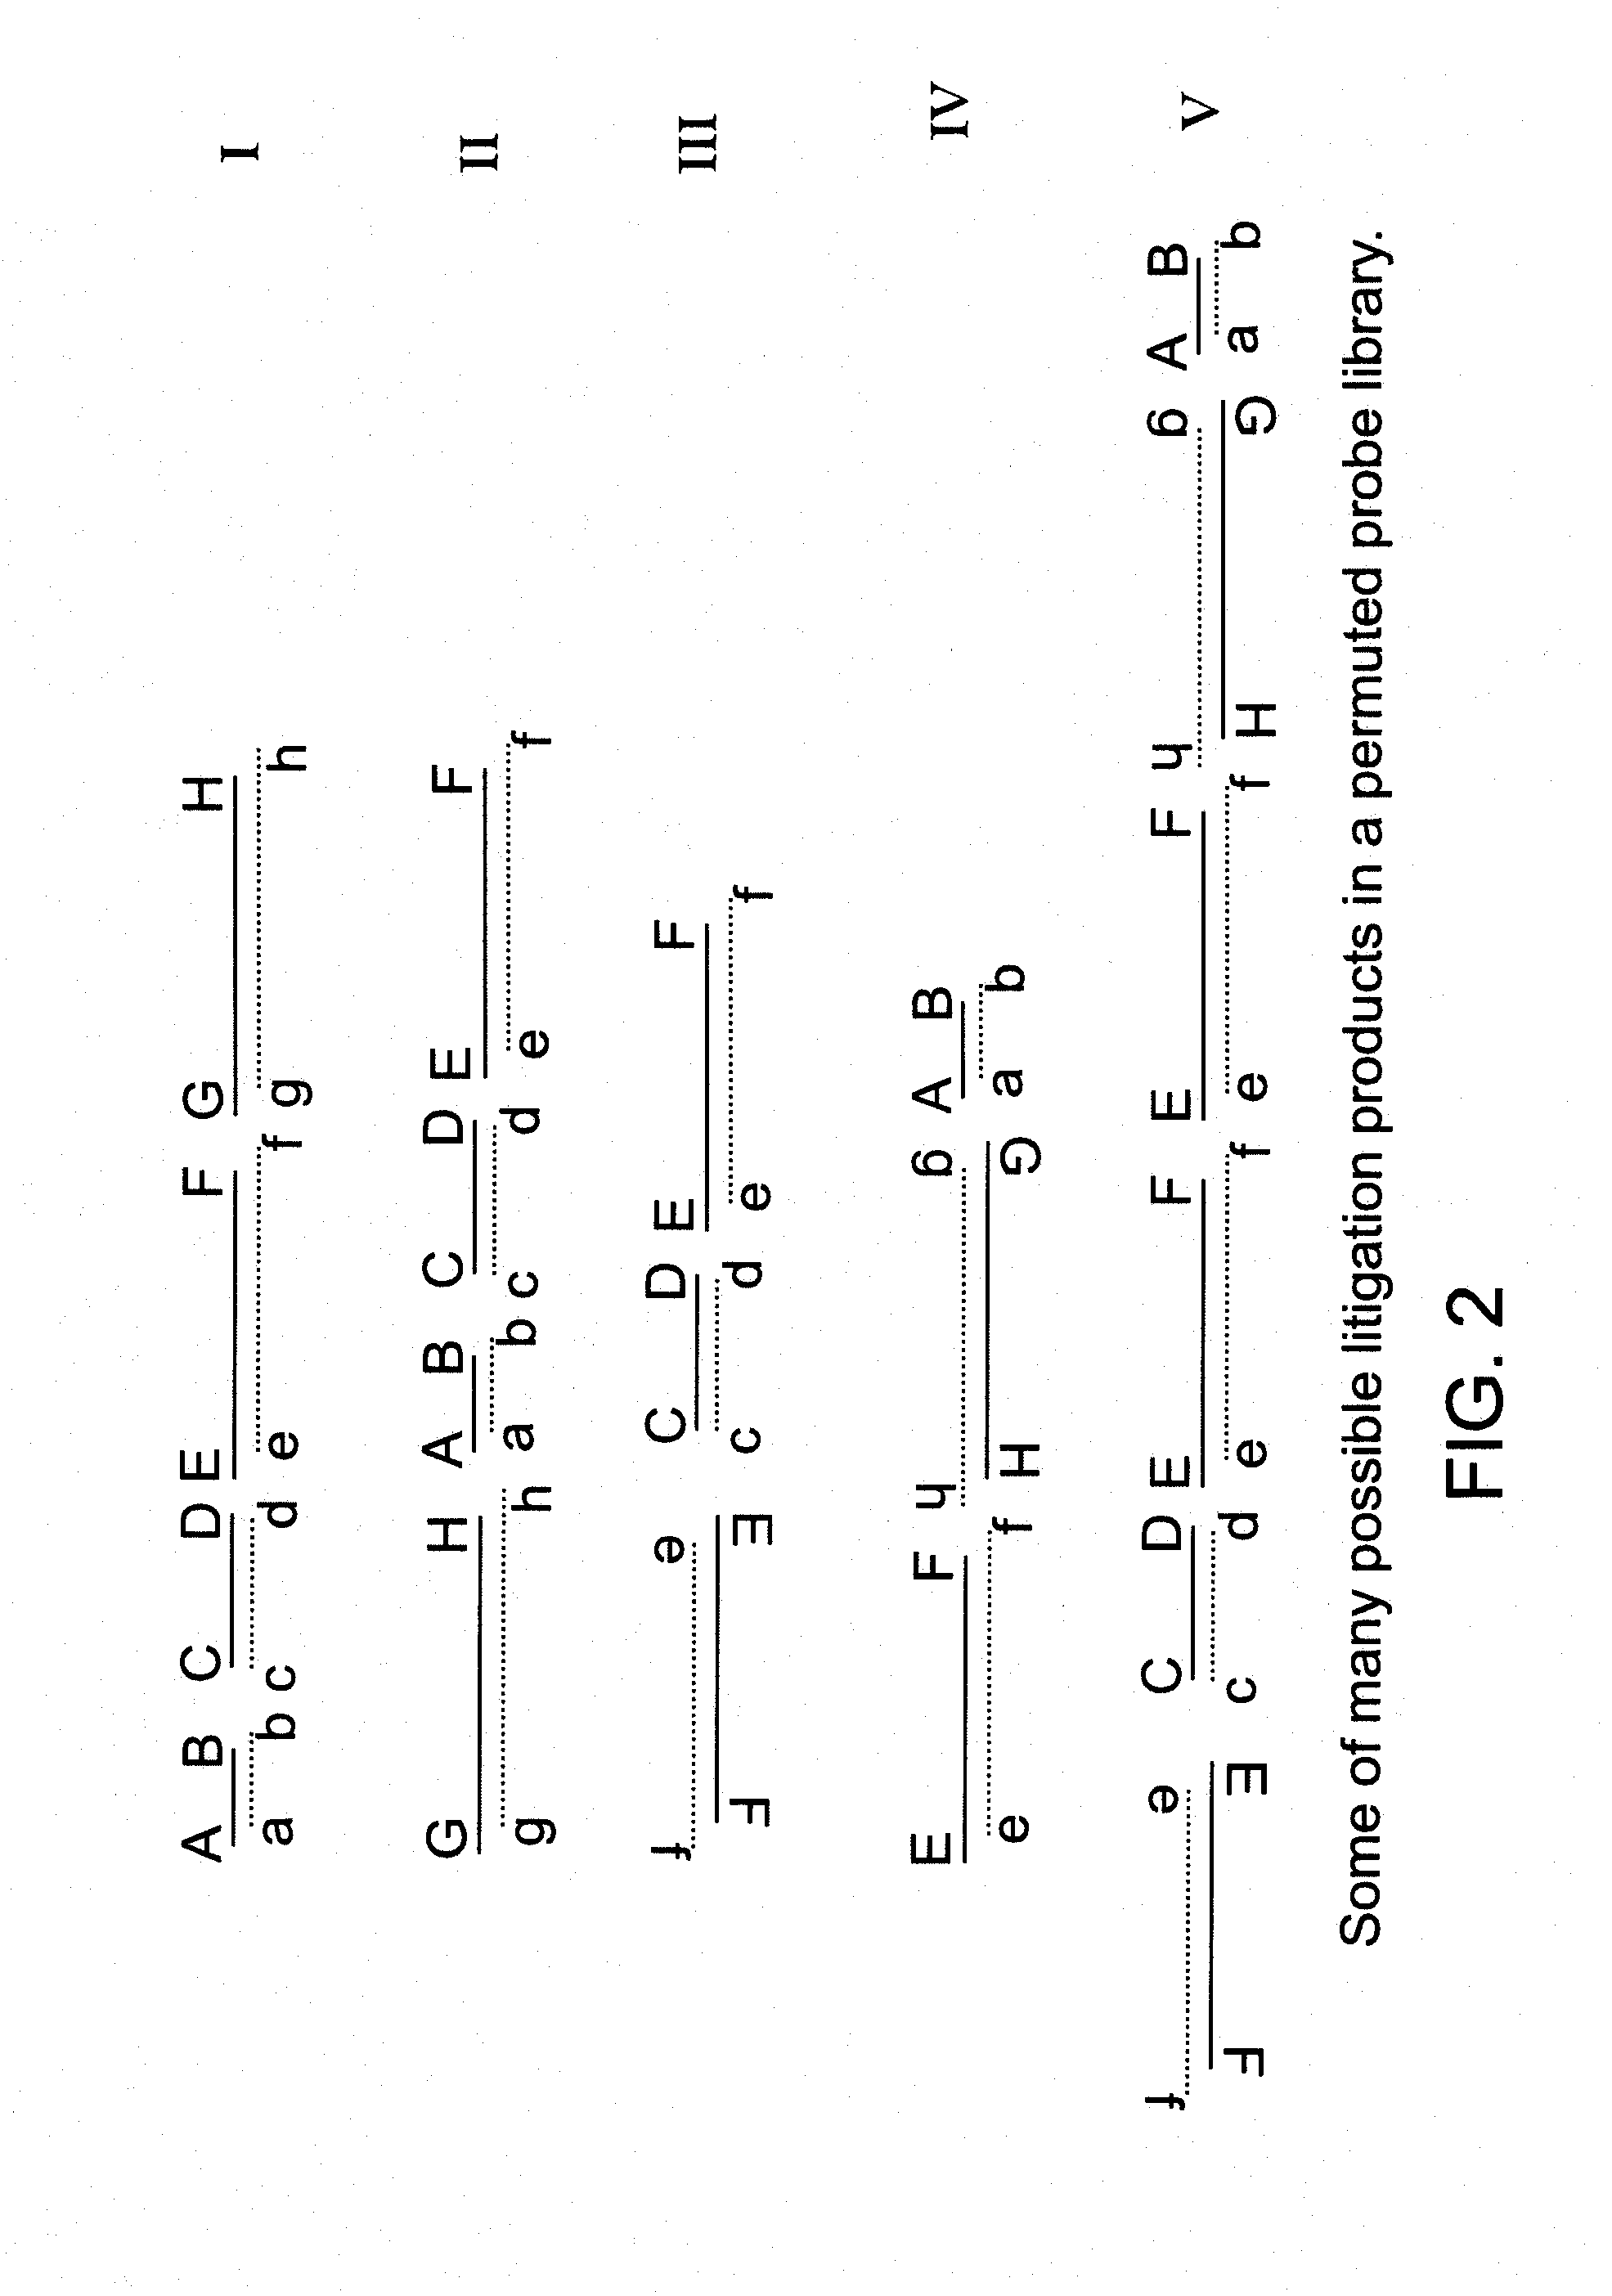 Methods for producing nucleic acid hybridization probes that amplify hybridization signal by promoting network formation